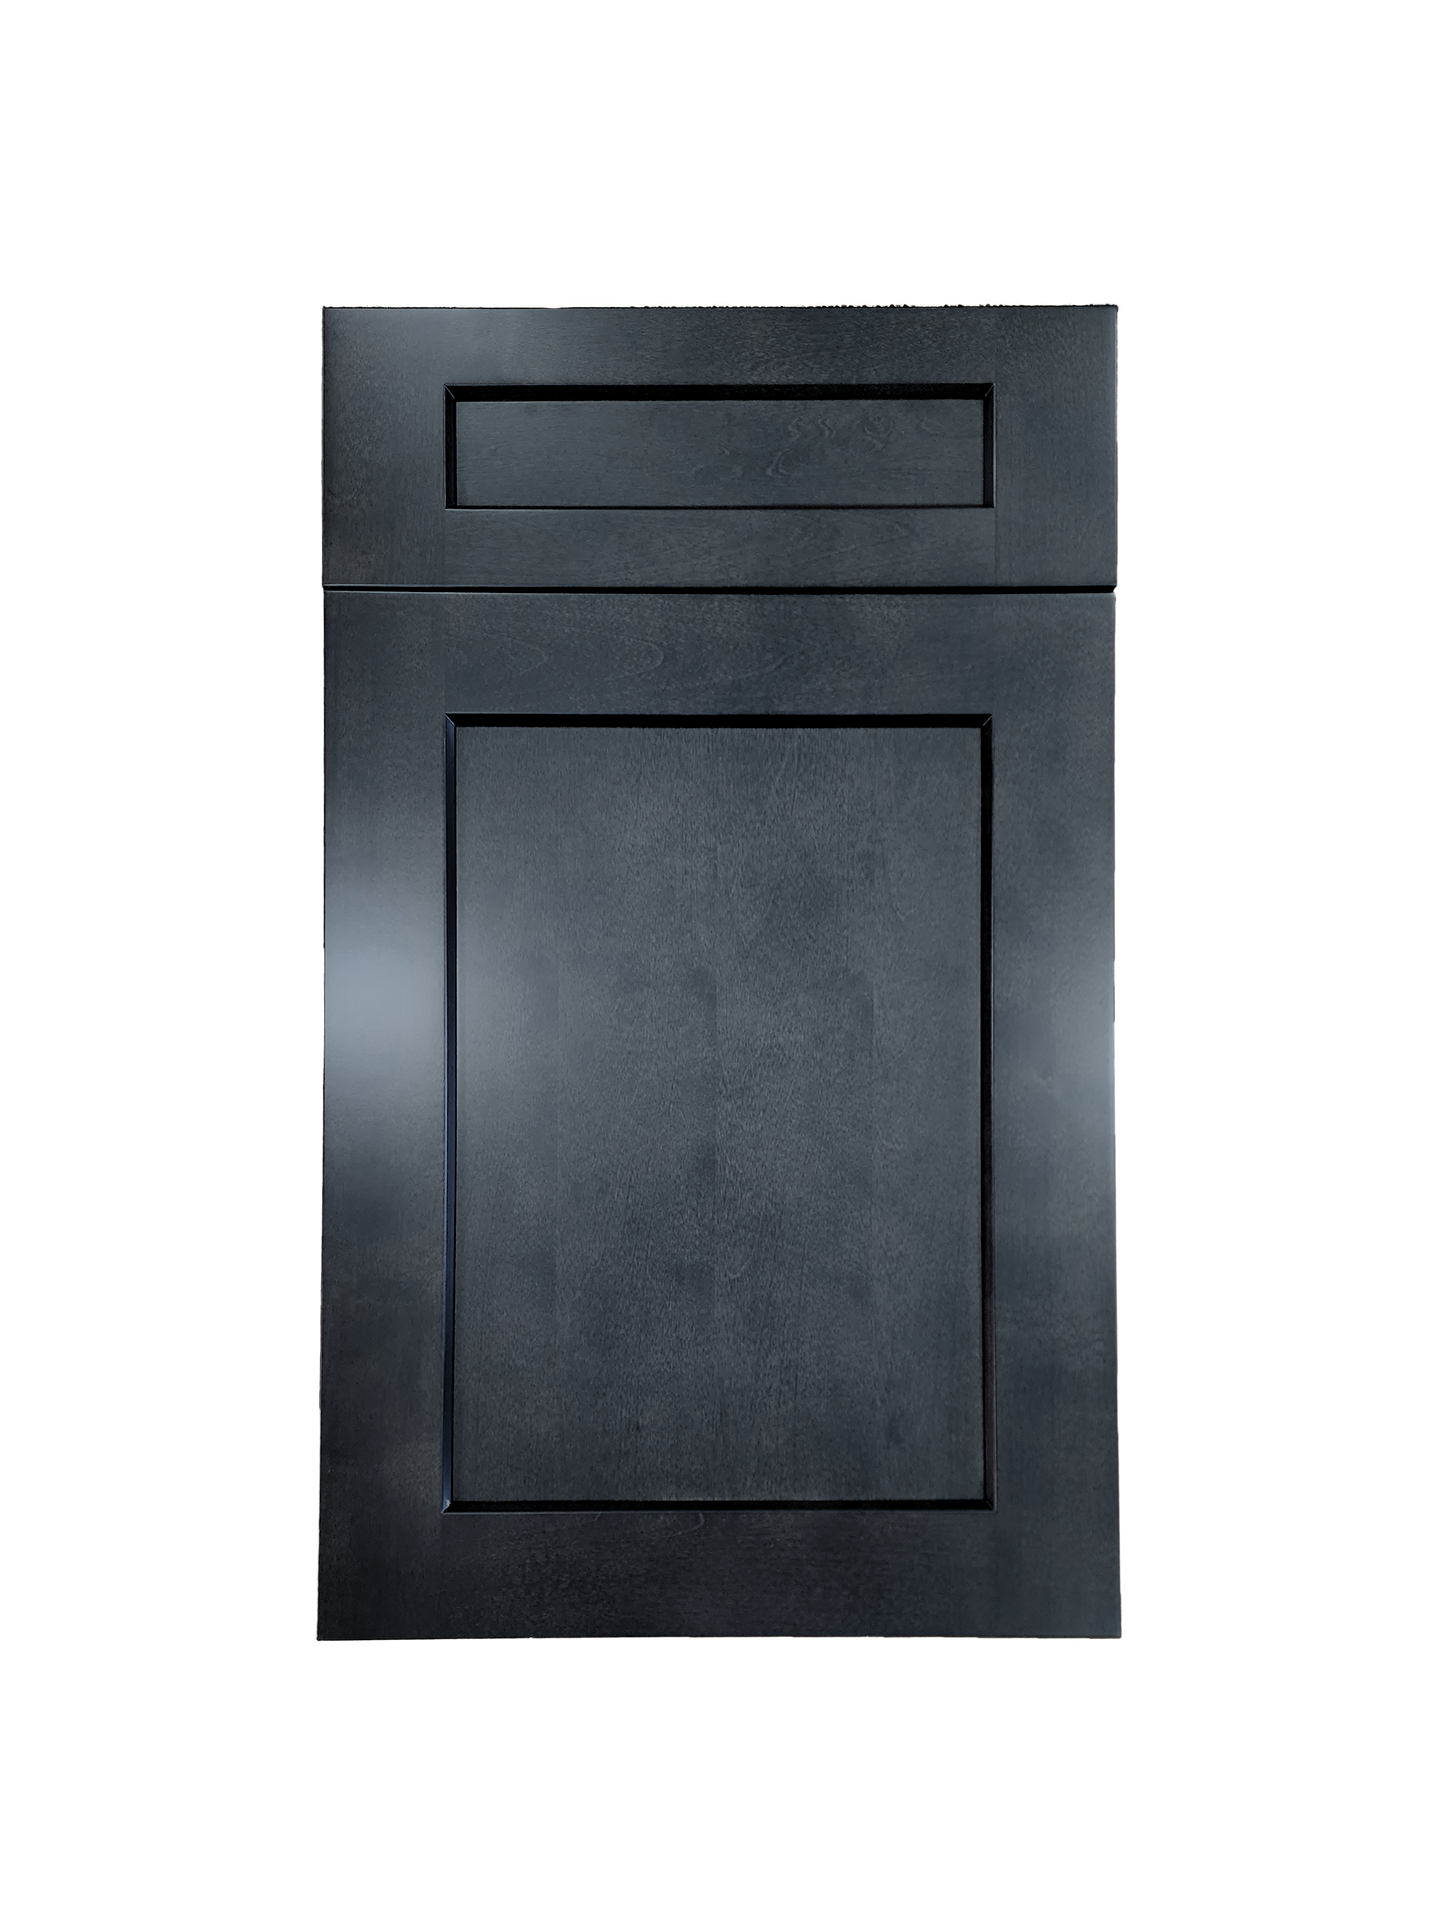 Stormy Grey Wall Cabinet 33 inches wide 12 inches deep 30 inches tall with Stormy Grey box and Stormy Grey doors